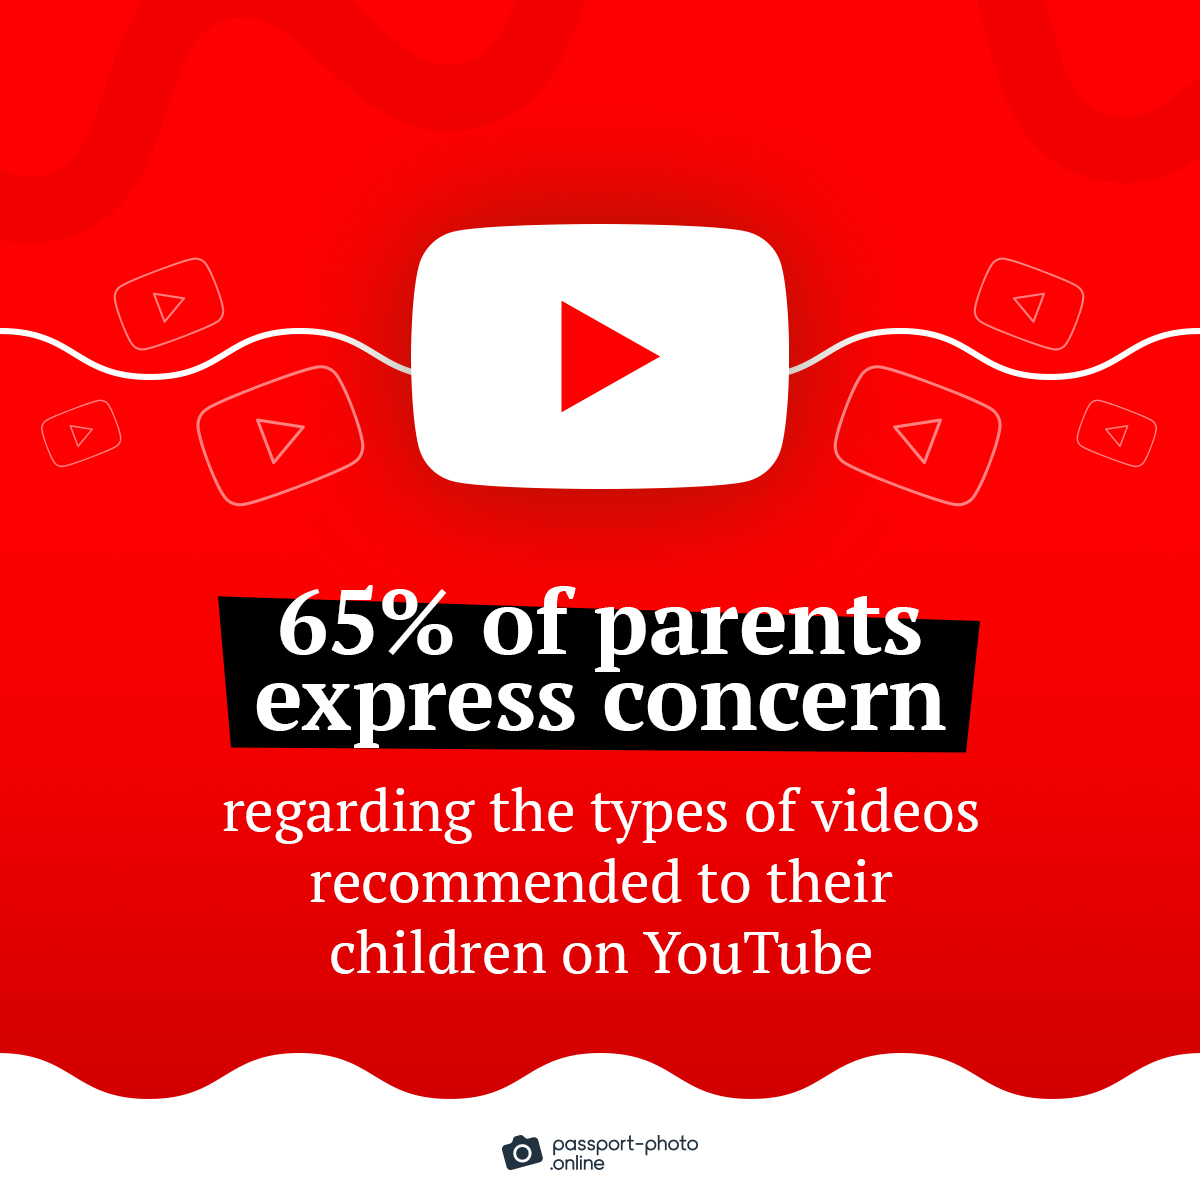 65% of parents express some level of concern regarding the kinds of videos recommended to their children on youtube